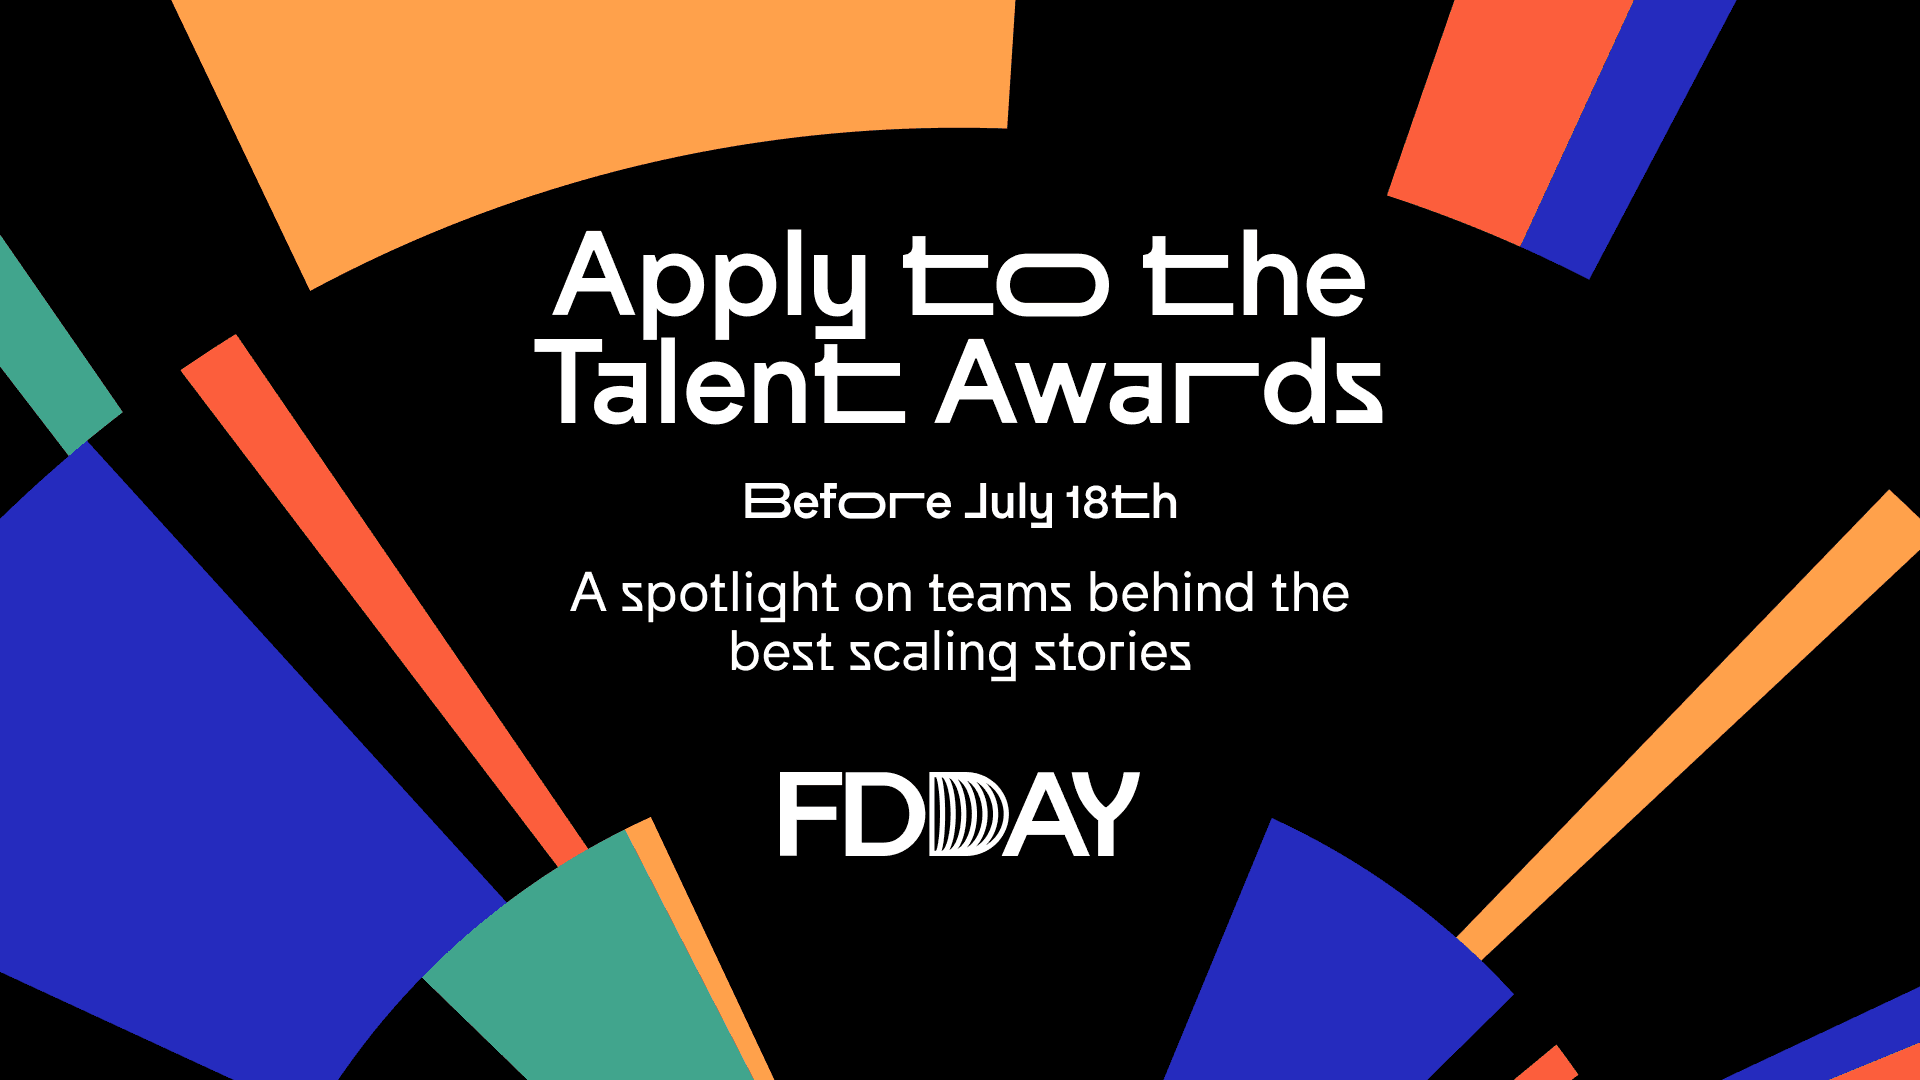 https://storage.tally.so/50f4dc2c-1685-4499-a2c7-799e1515fb60/APPLY-TALENT-AWARDS-16_9.png